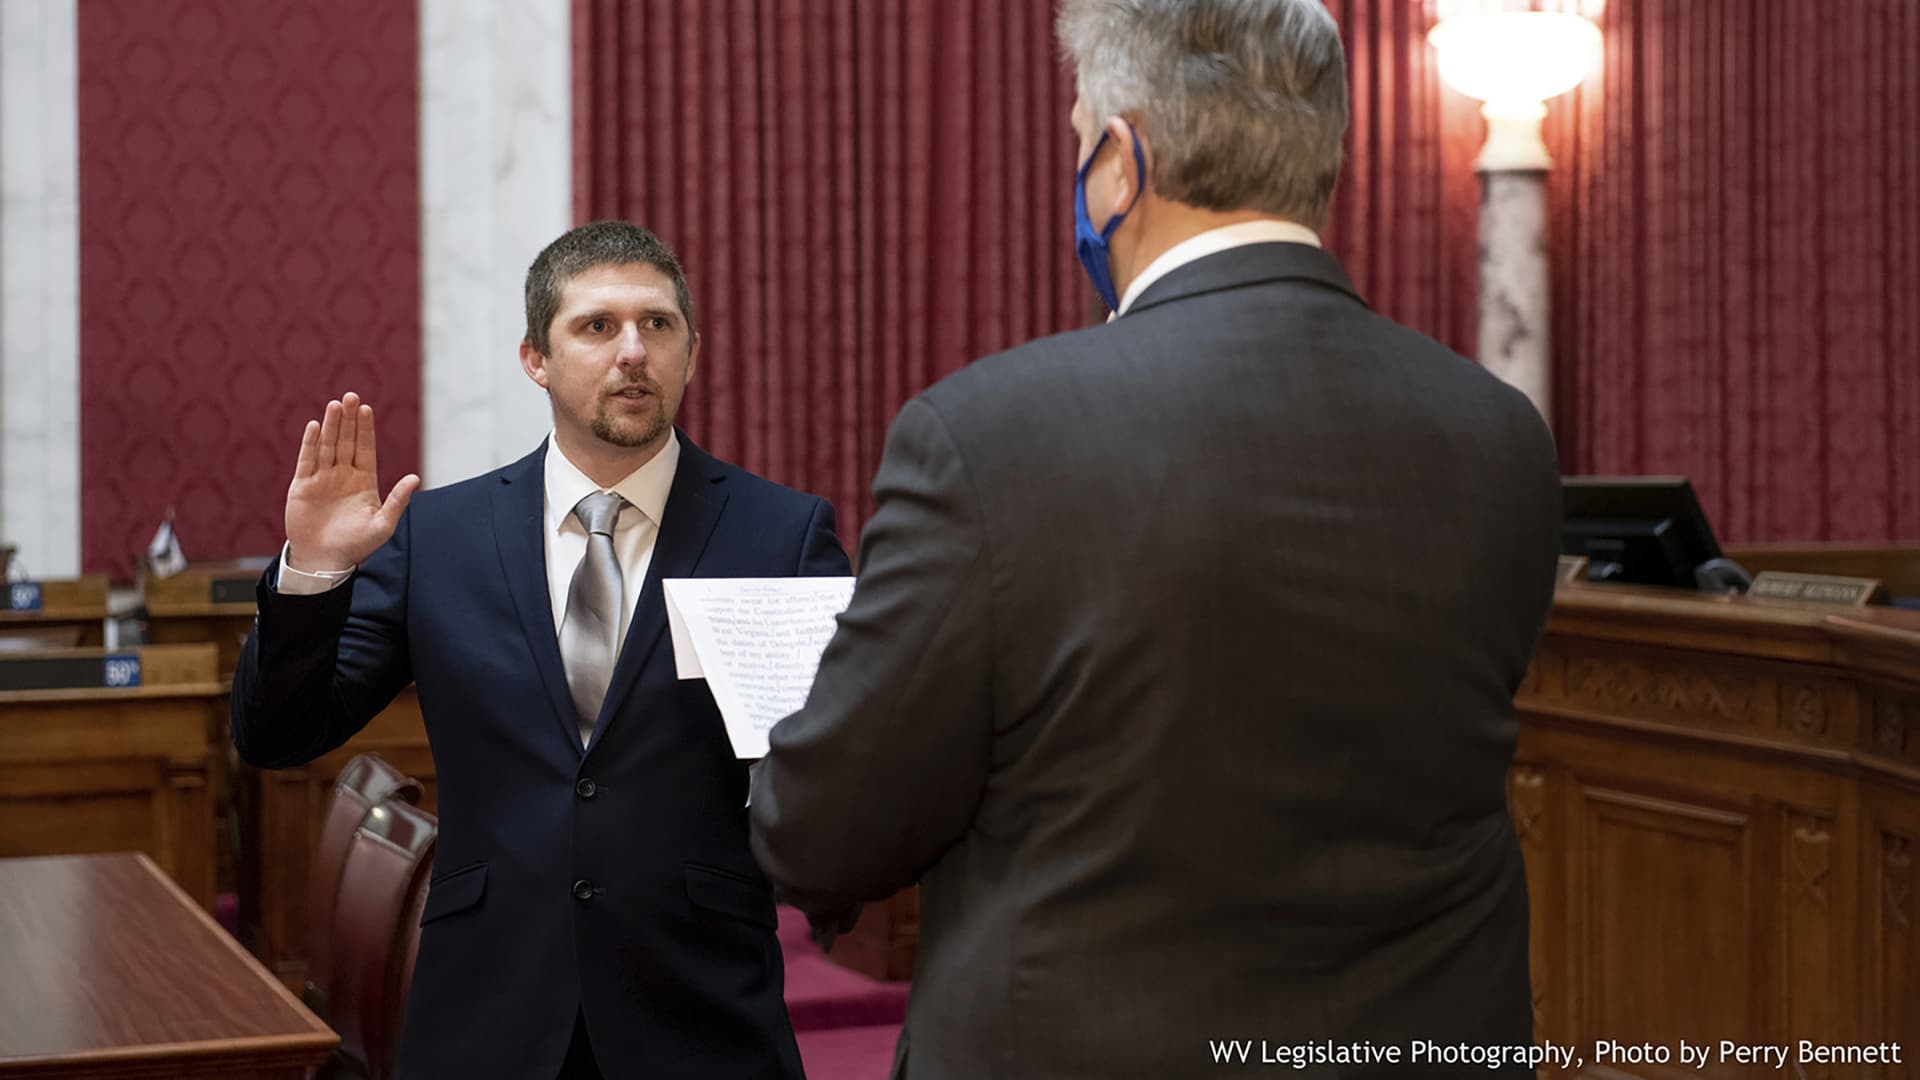 West Virginia House of Delegates member Derrick Evans, left, is given the oath of office Dec. 14, 2020, in the House chamber at the state Capitol in Charleston, W.Va.